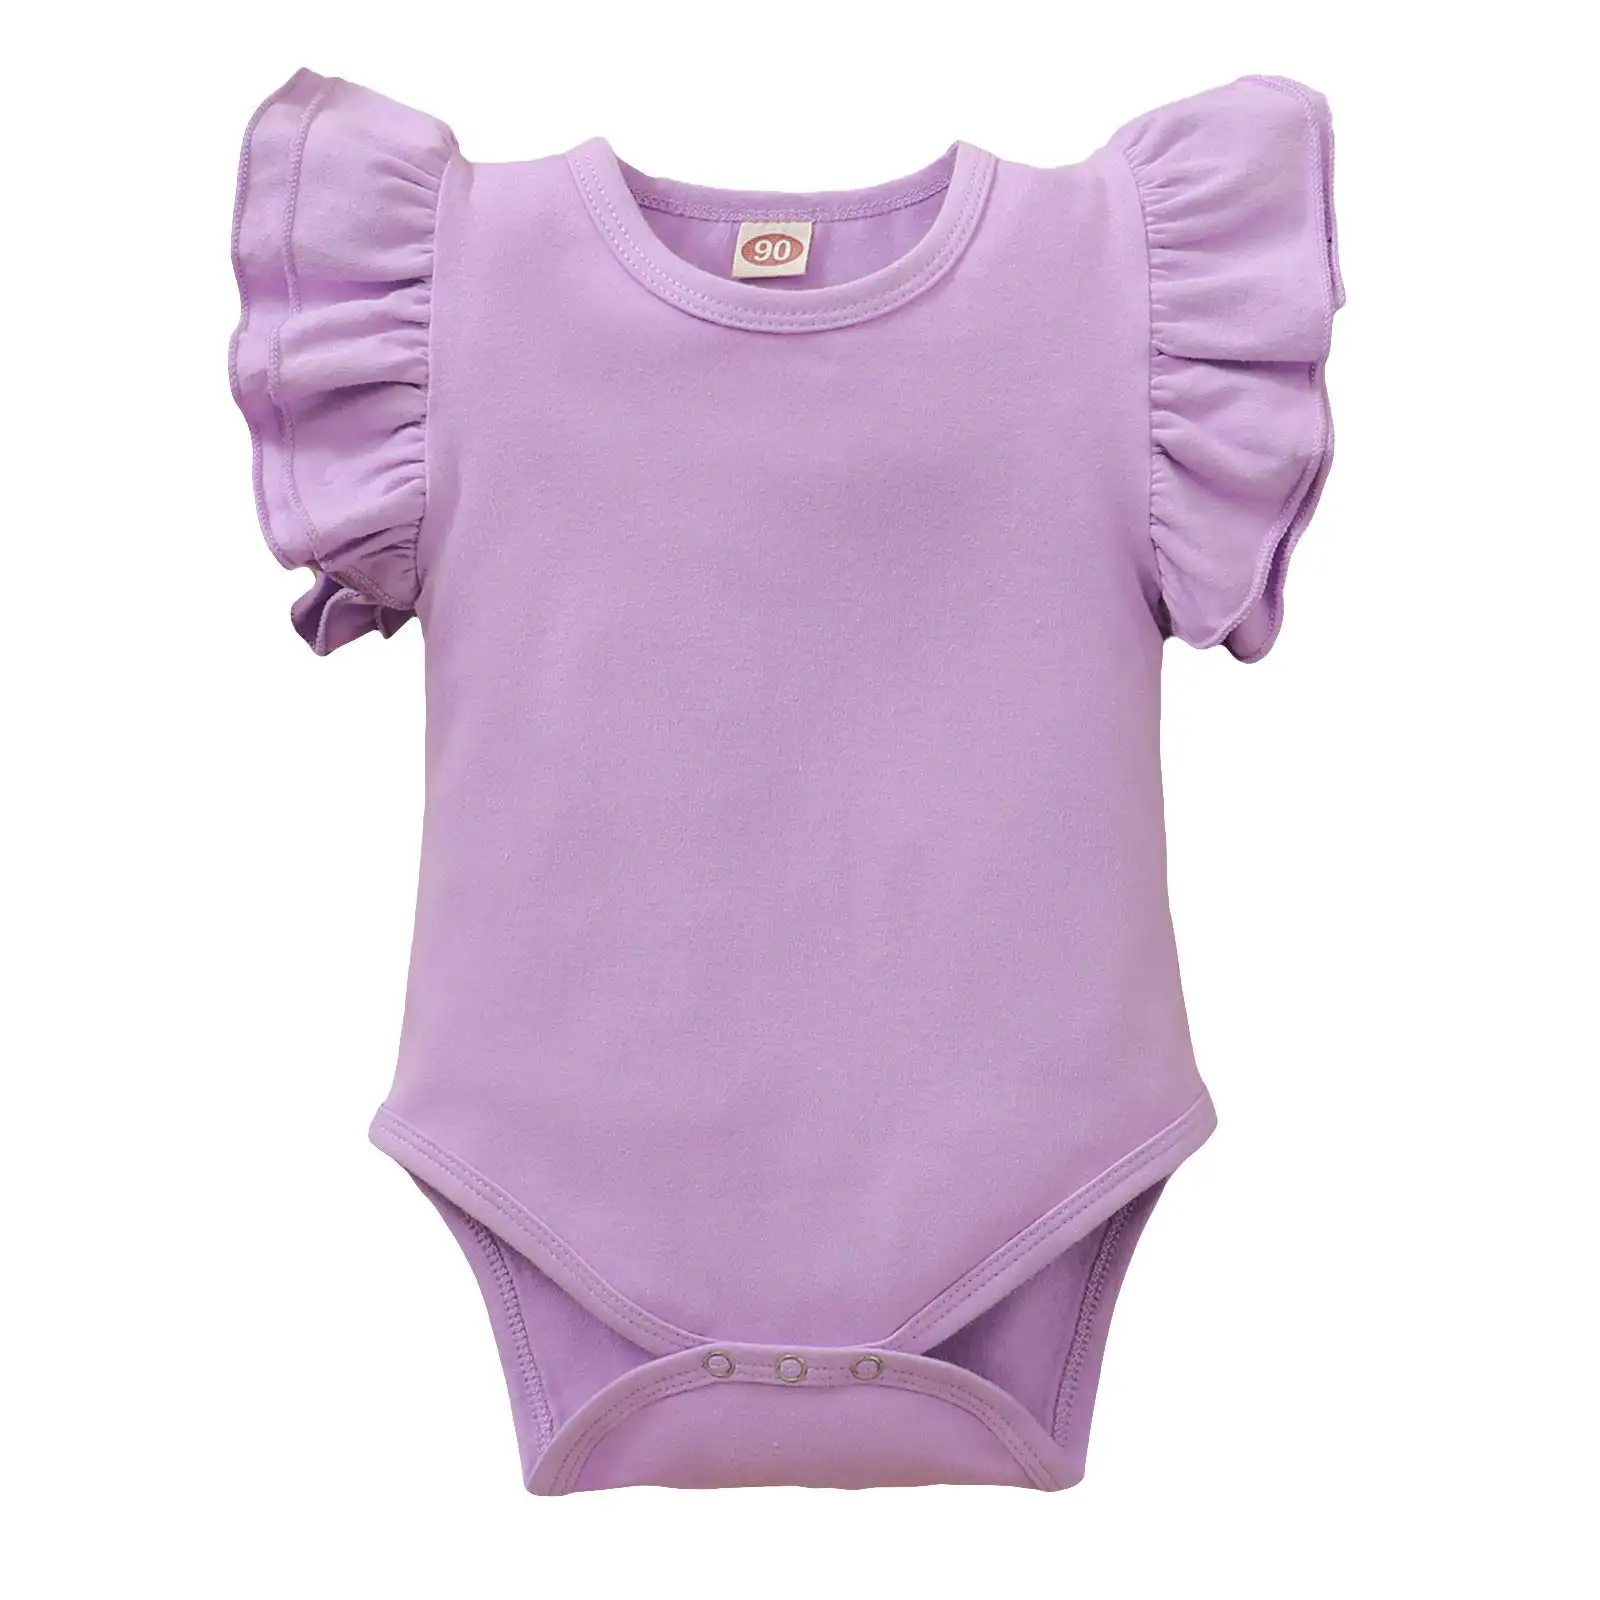 Summer Short Sleeve Newborn infant Baby Clothes purple 2 Layers Cotton toddler Frill Flutter Sleeve Baby Romper 0 - 24 months